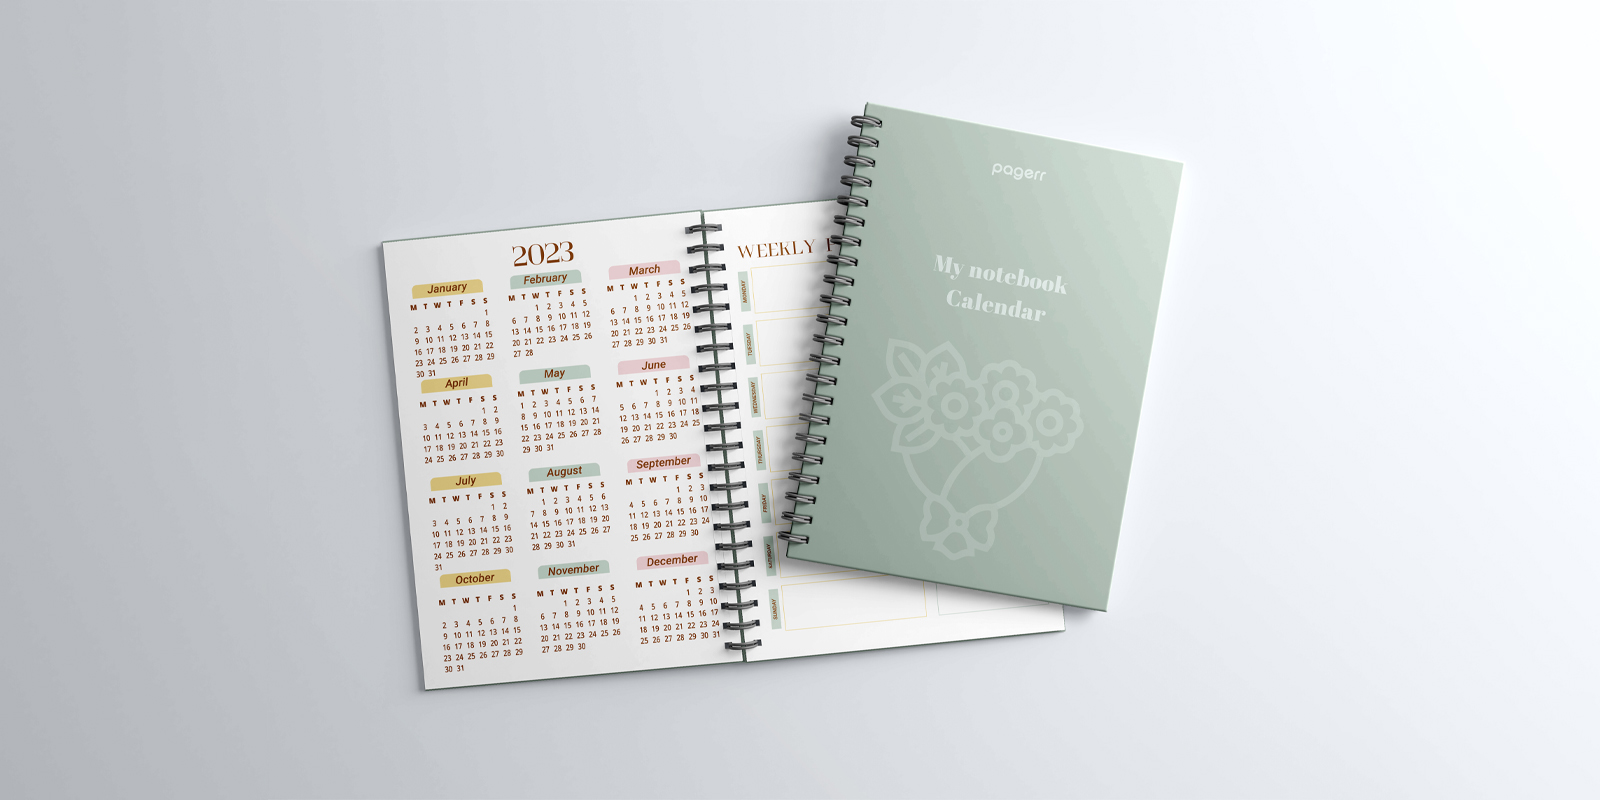 Notebook calendars in Hobart - Print with Pagerr